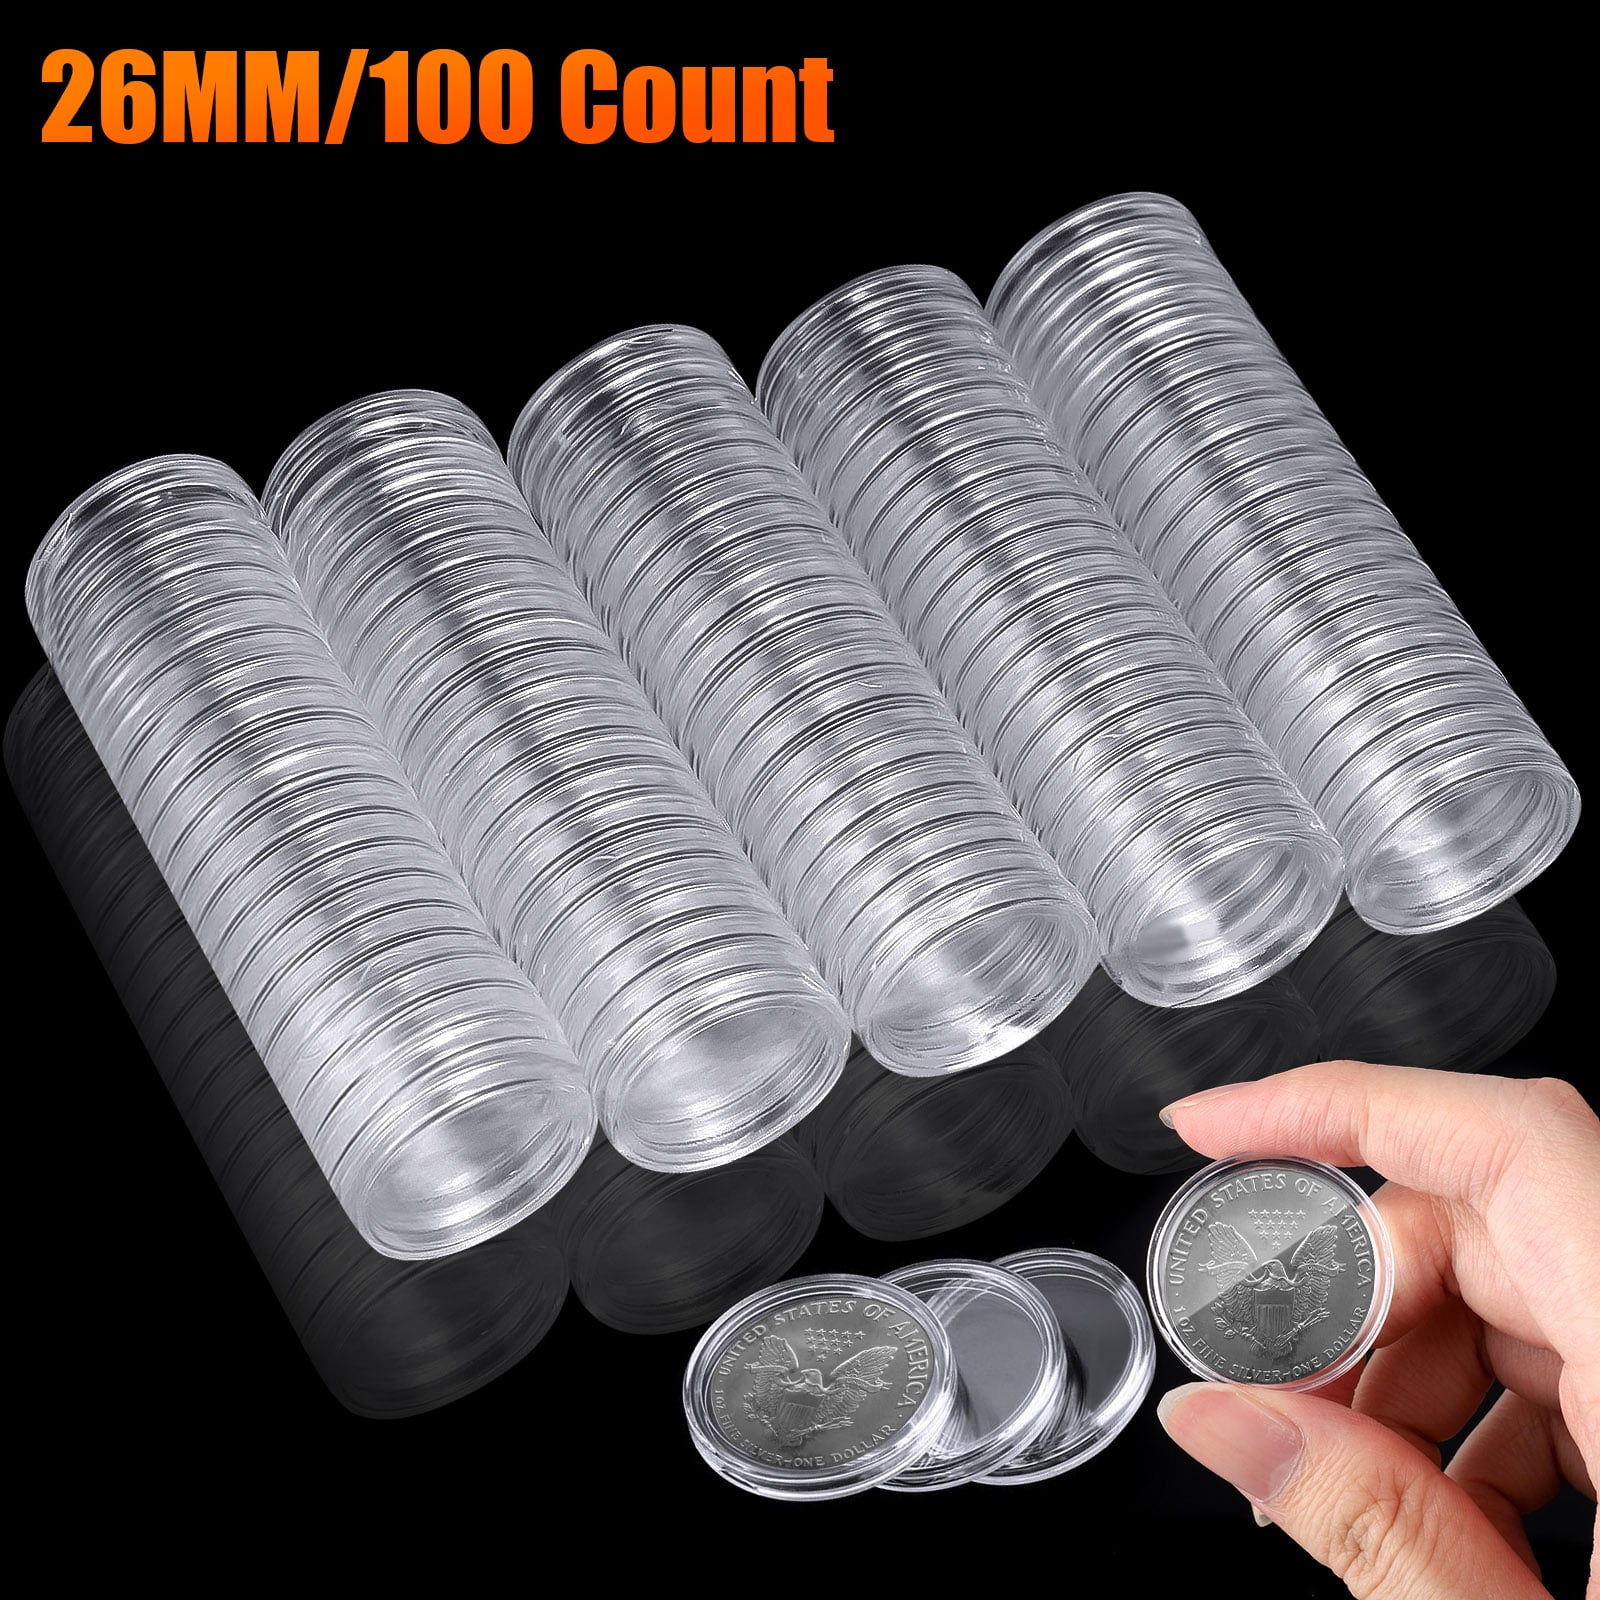 5PCs PCCB High Quality Acrylic Coin Capsules Holder Case 21mm For US Nickel 